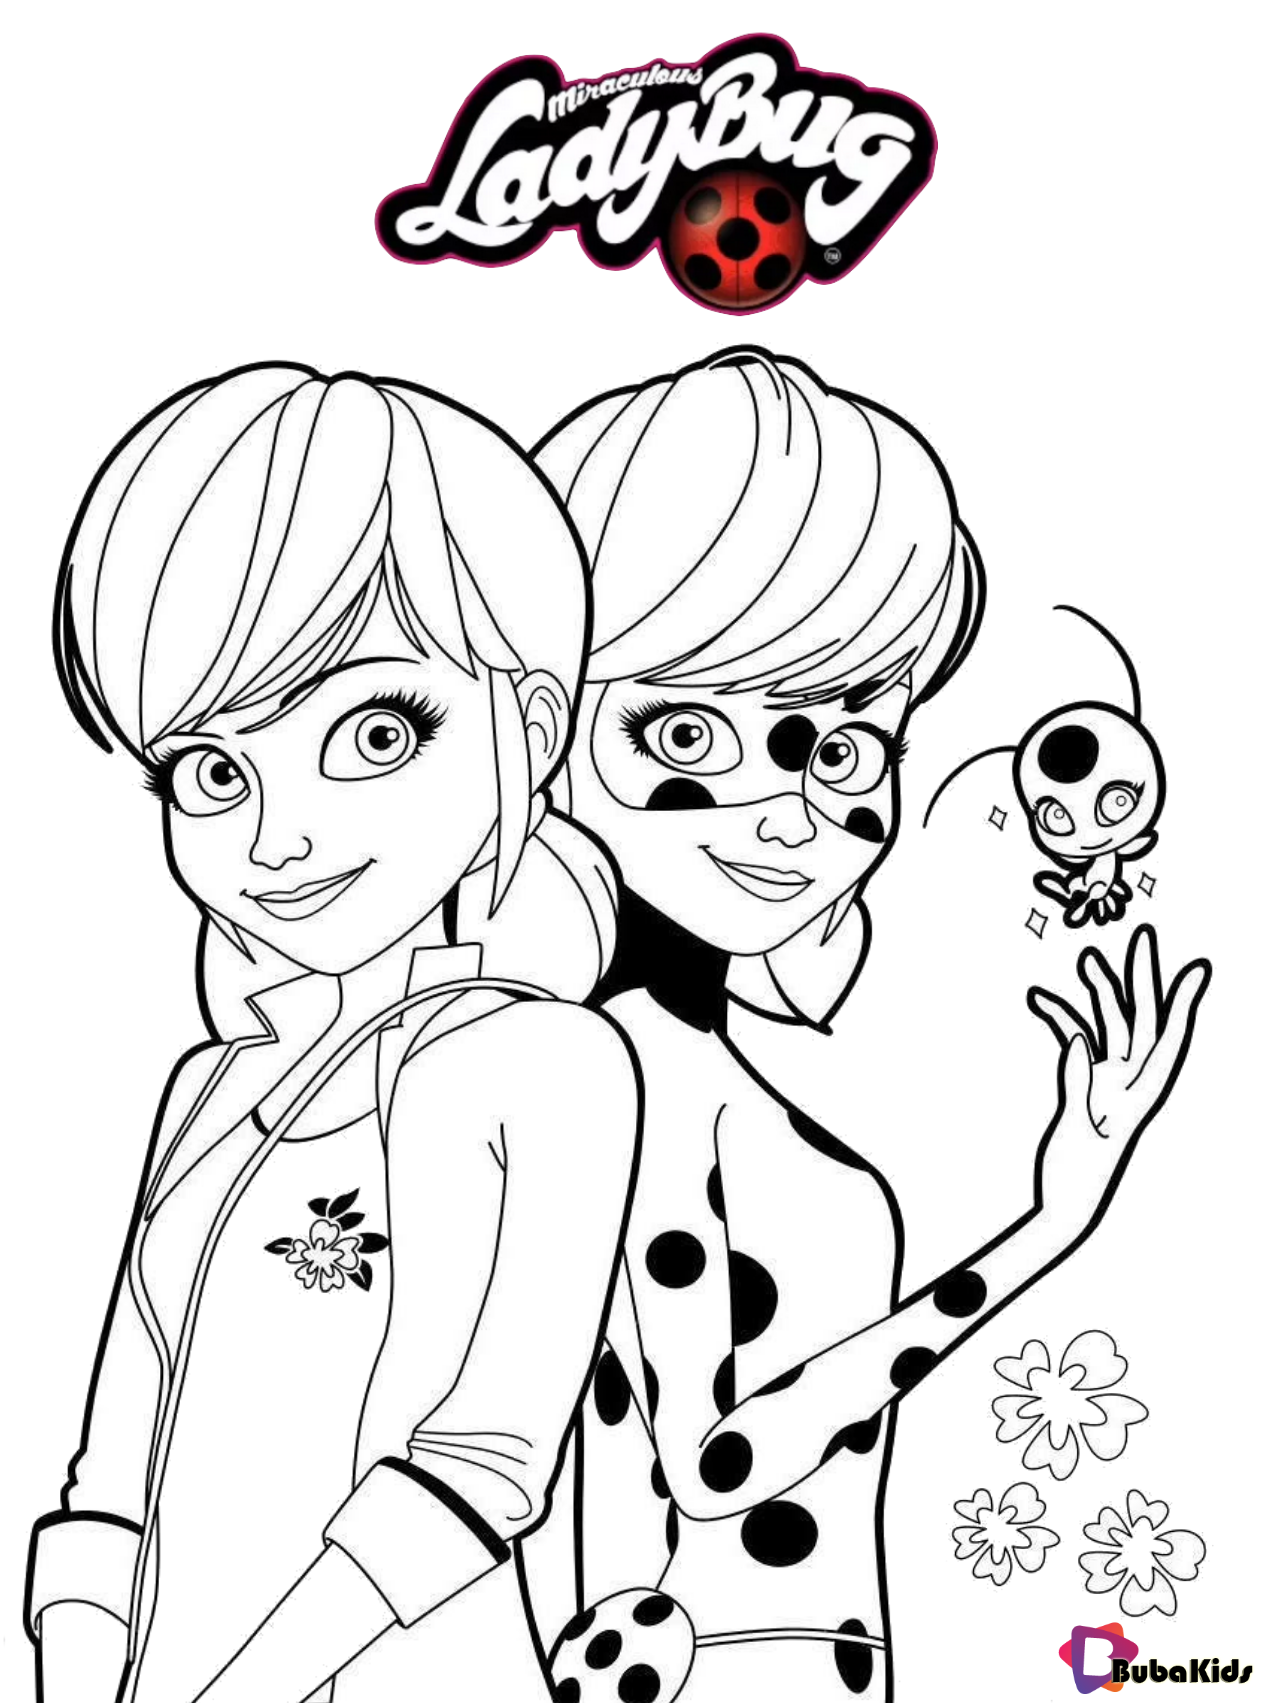 Miraculous ladybug free coloring page for kids Wallpaper